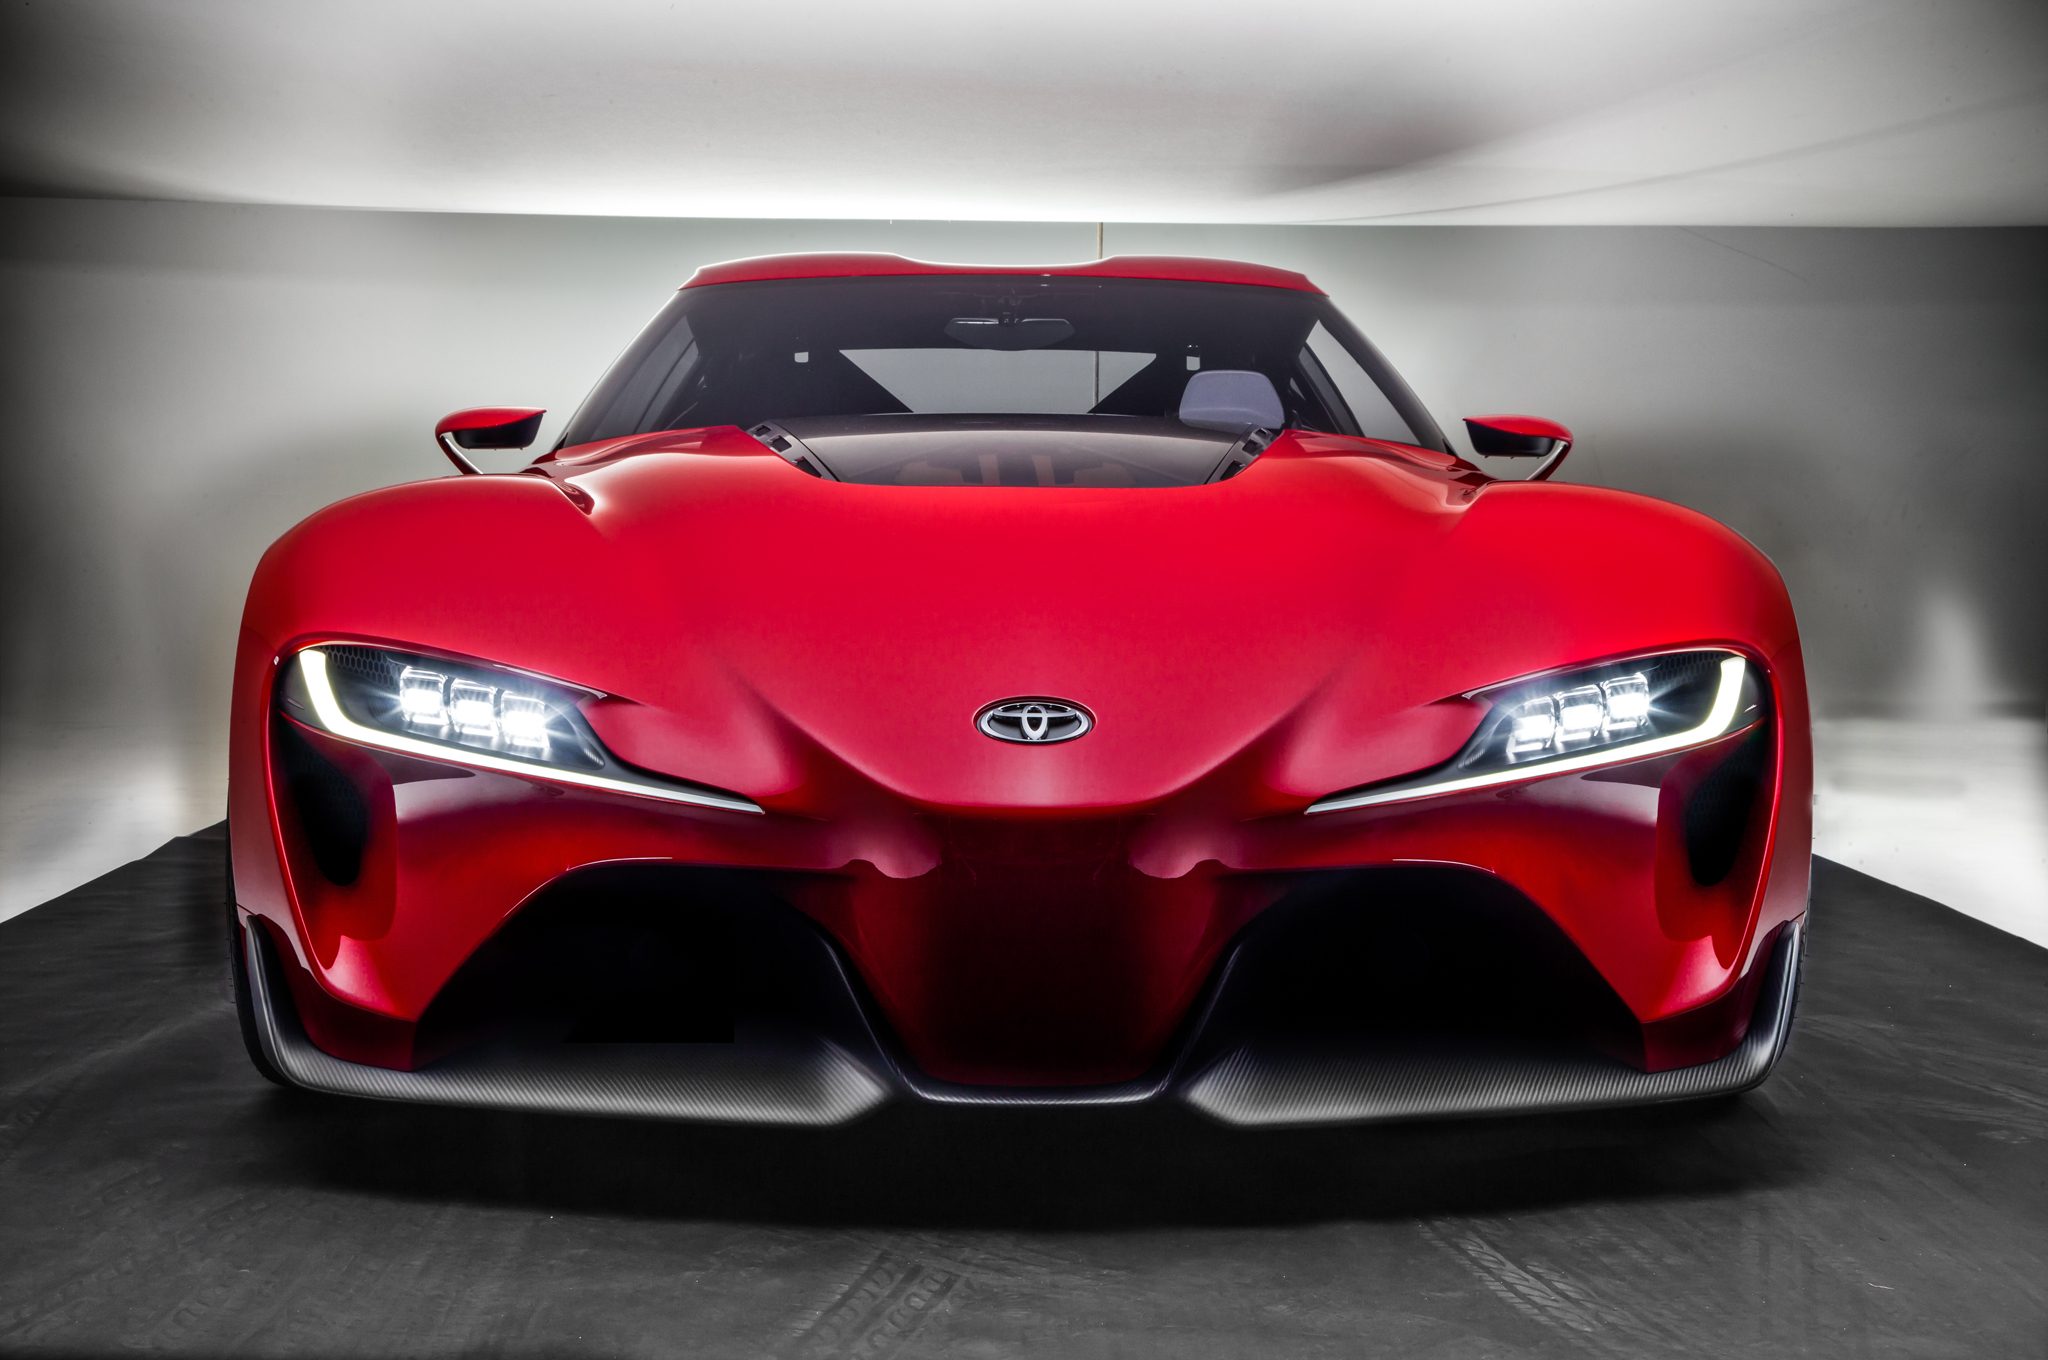 toyota-ft-1-front-end-jpg.340